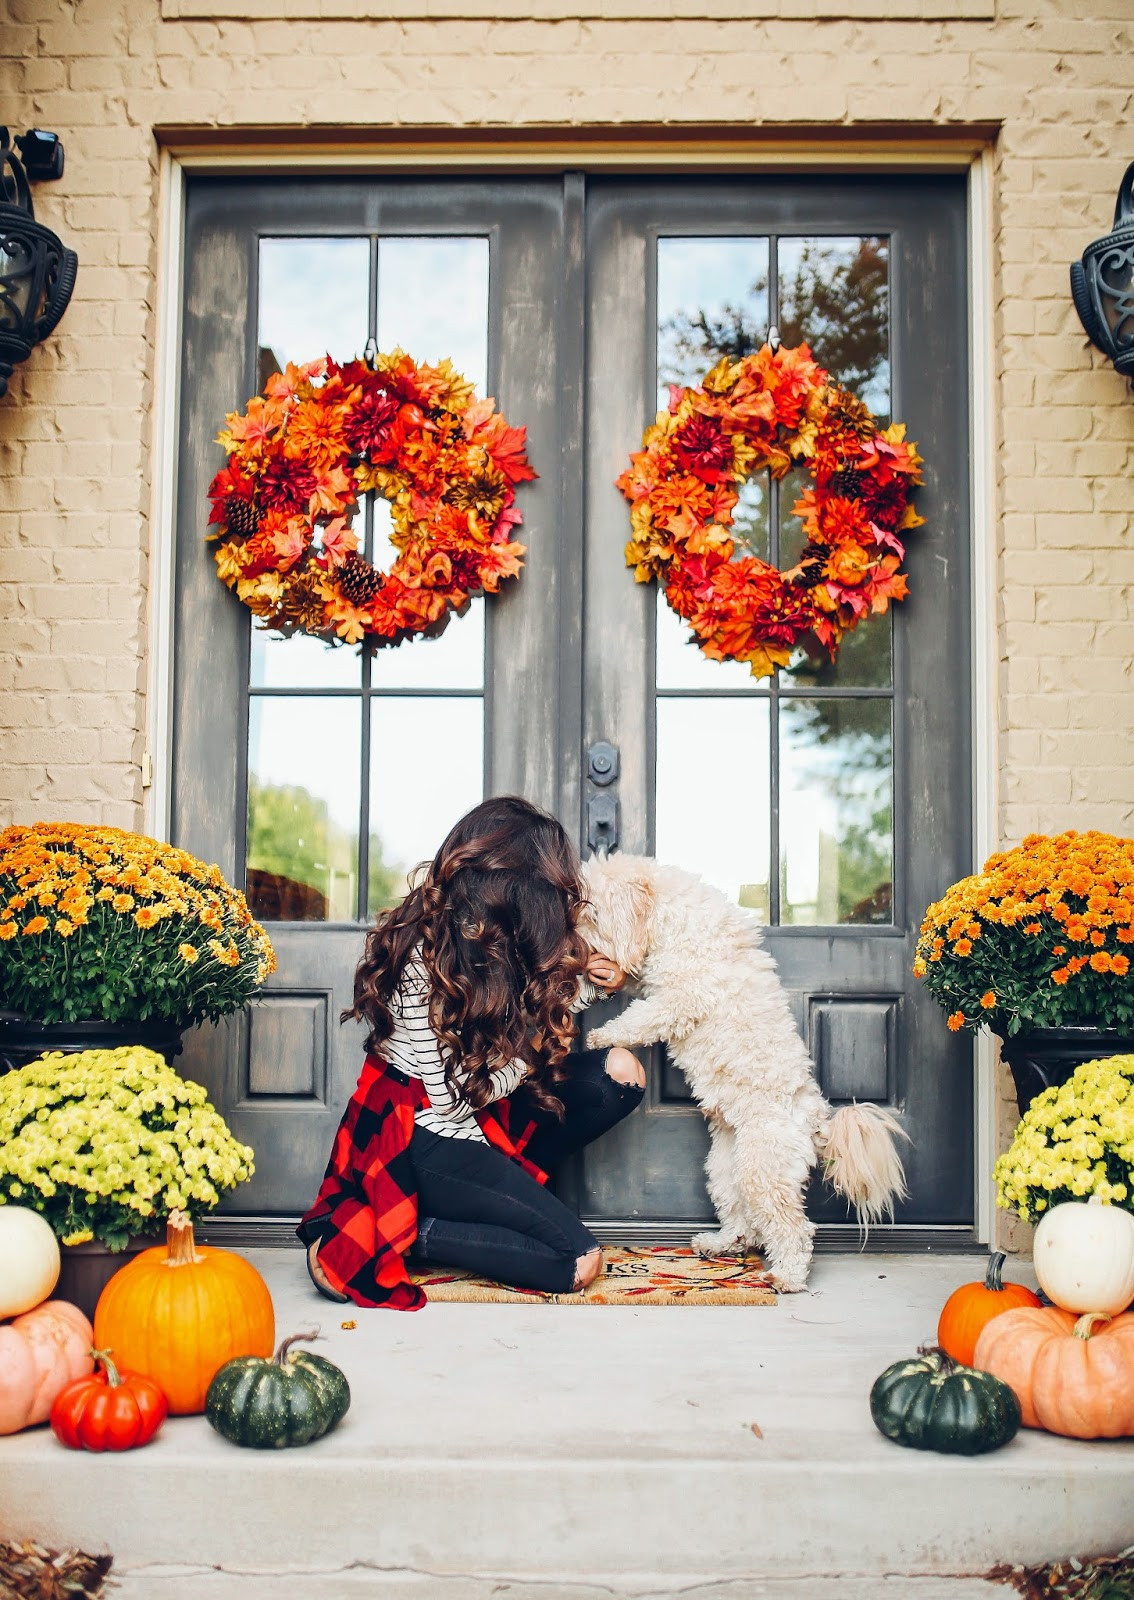 Fall Decor Ideas For Front Porch
 Our Fall Front Porch Decor